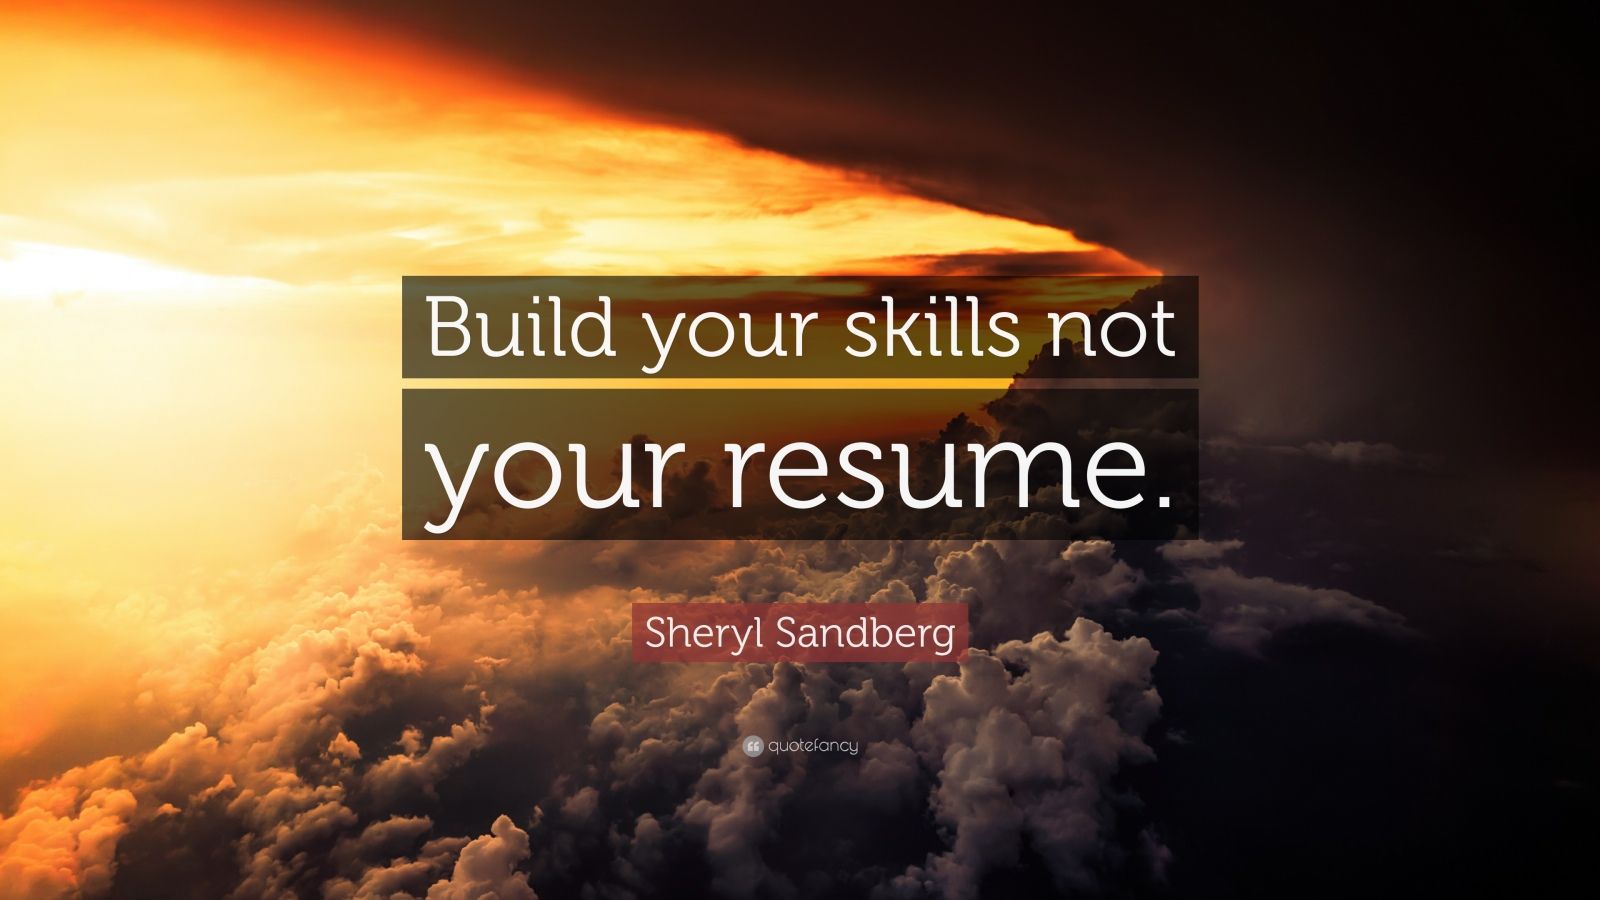 Sheryl Sandberg Quote: “Build your skills not your resume.”